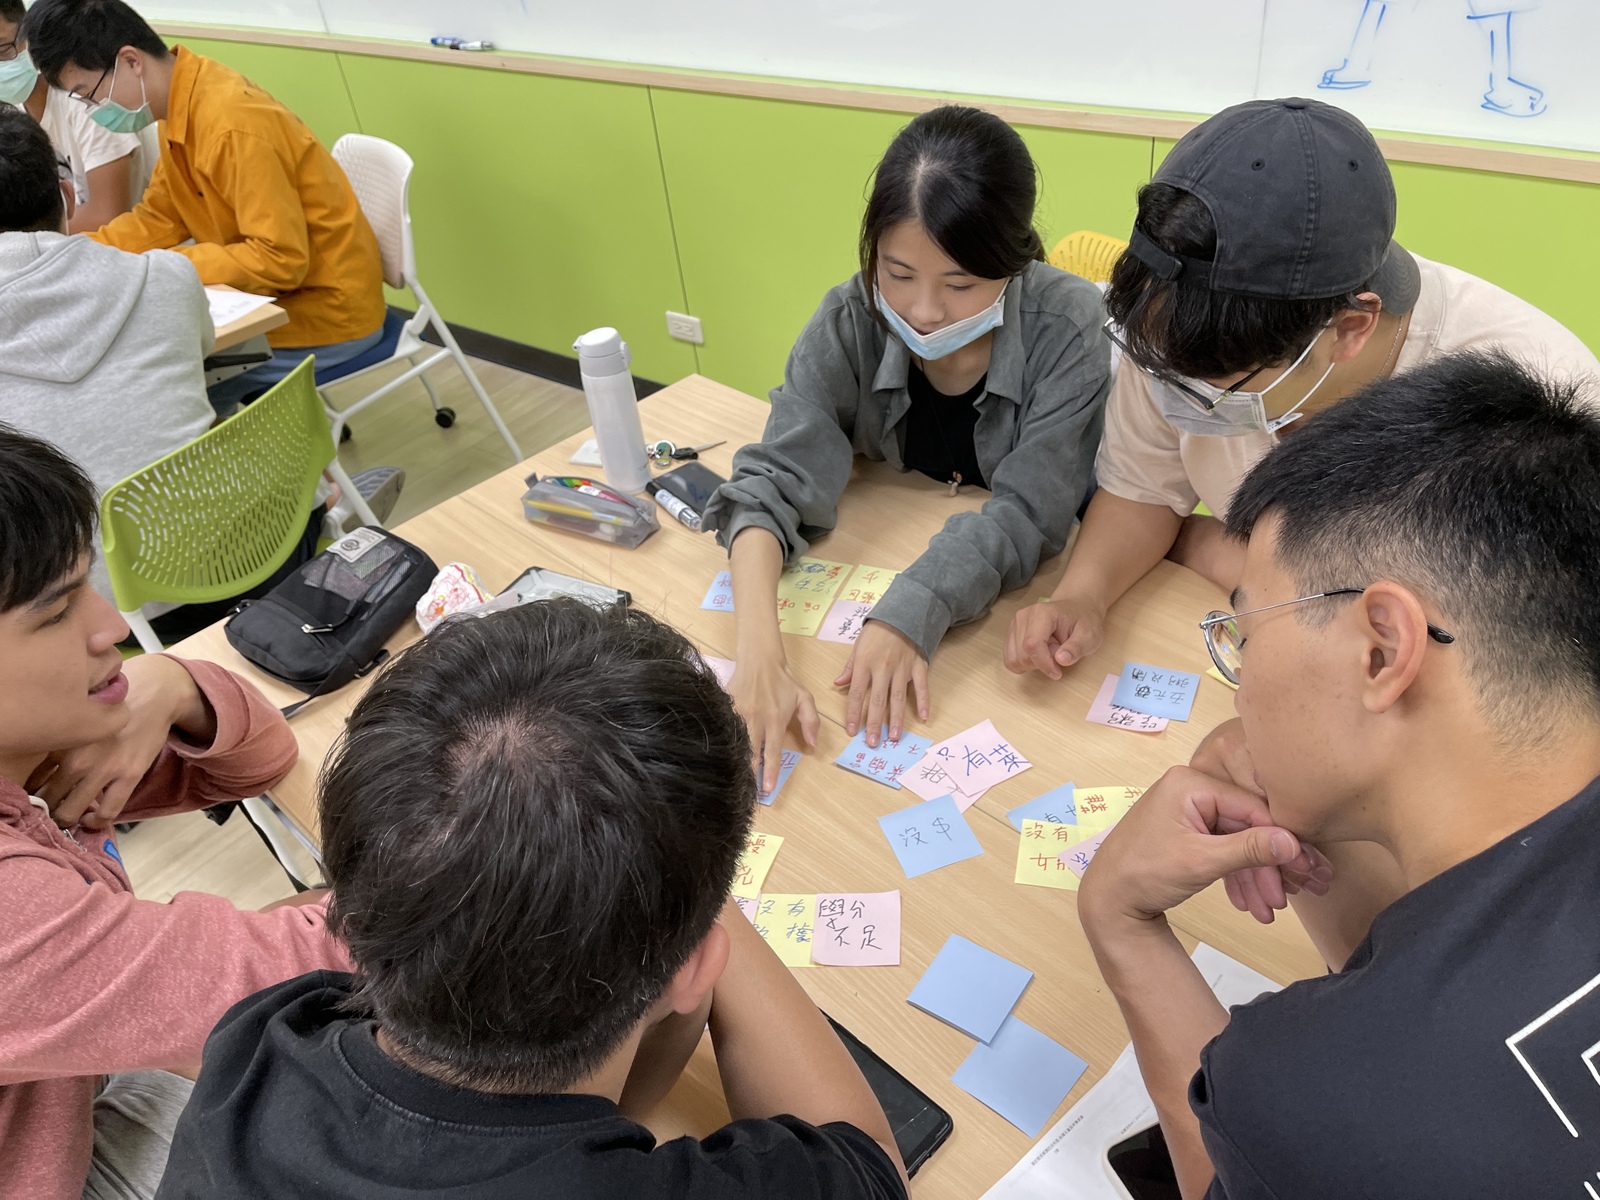 Associate Professor Chin-Ping Yu of the Department of Photonics has been conducting “A study of the effects of creative problem-solving instruction on creativity of engineering undergraduate students: using "Creativity via Information Technology Applications" course as an example”.